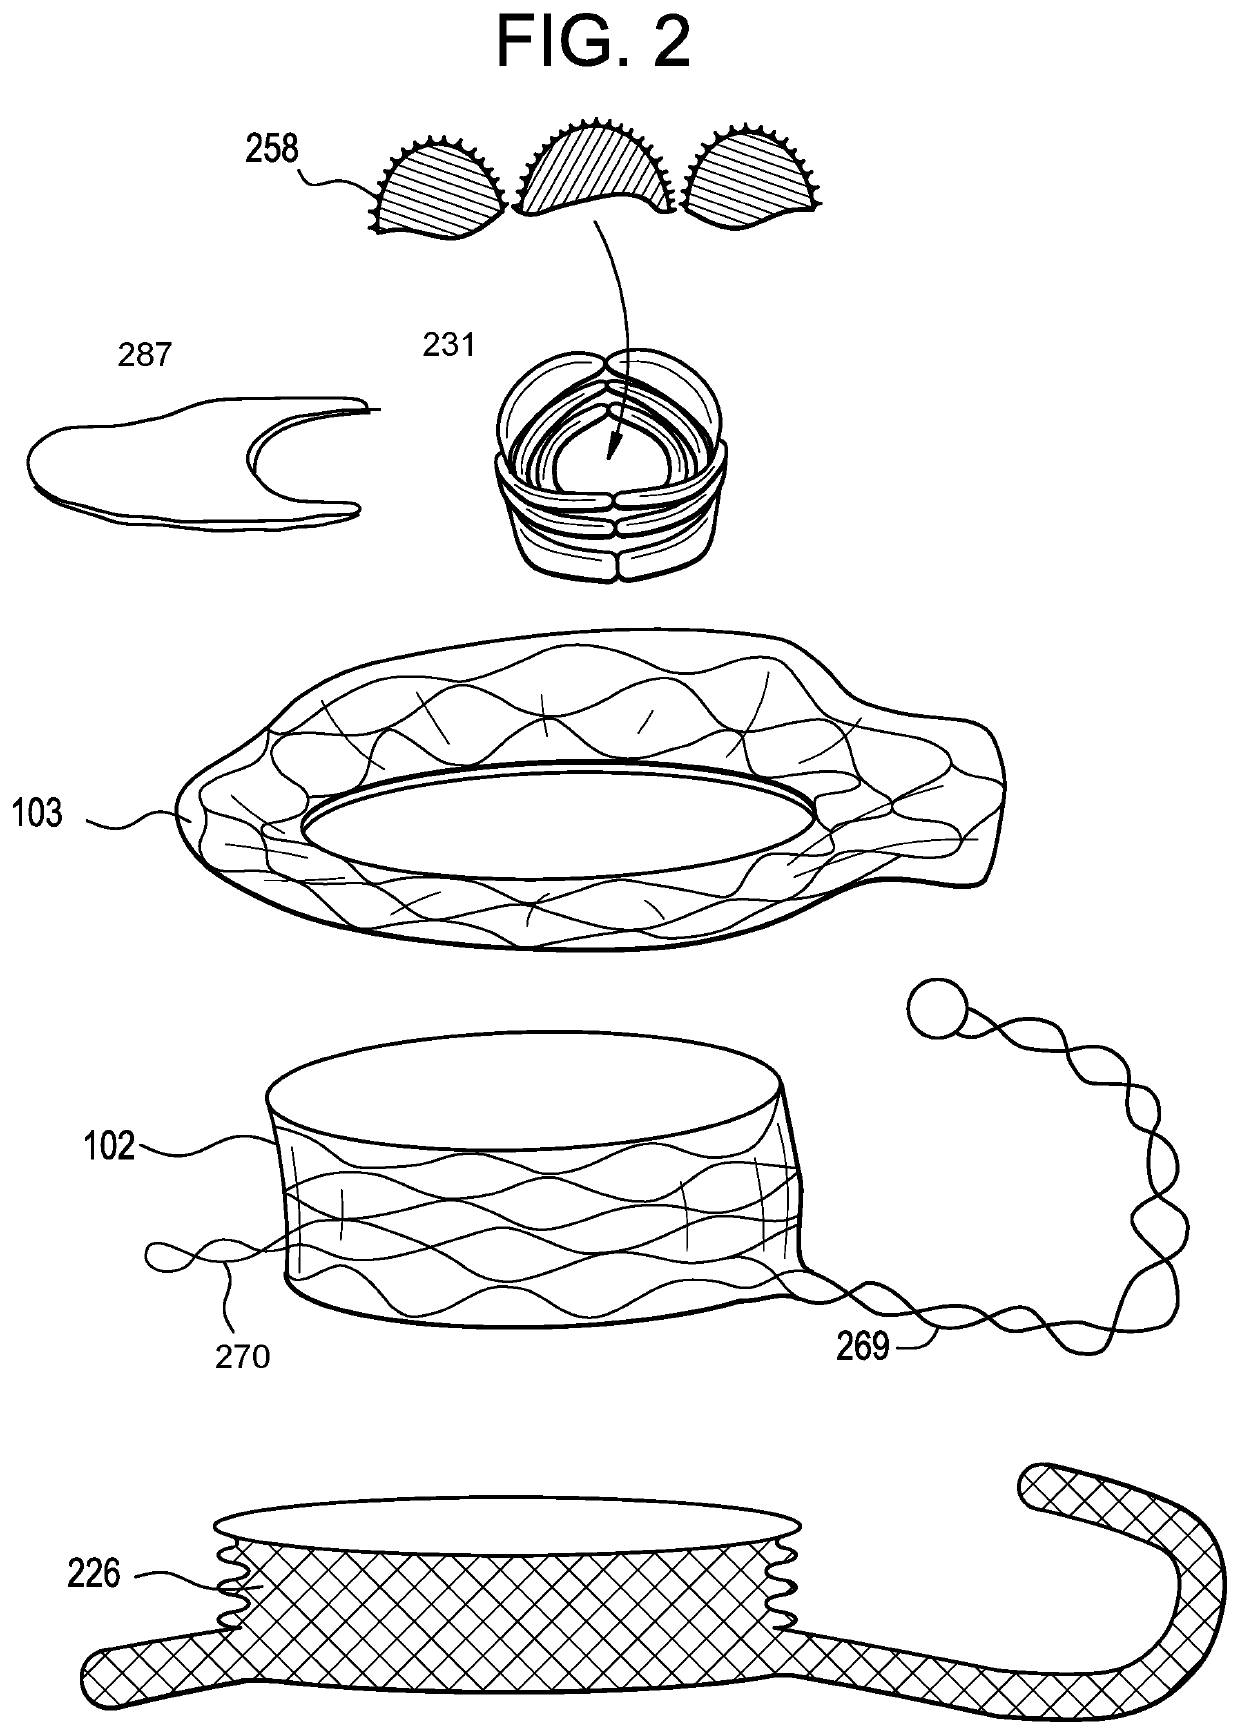 Proximal, distal, and anterior anchoring tabs for side-delivered transcatheter mitral valve prosthesis